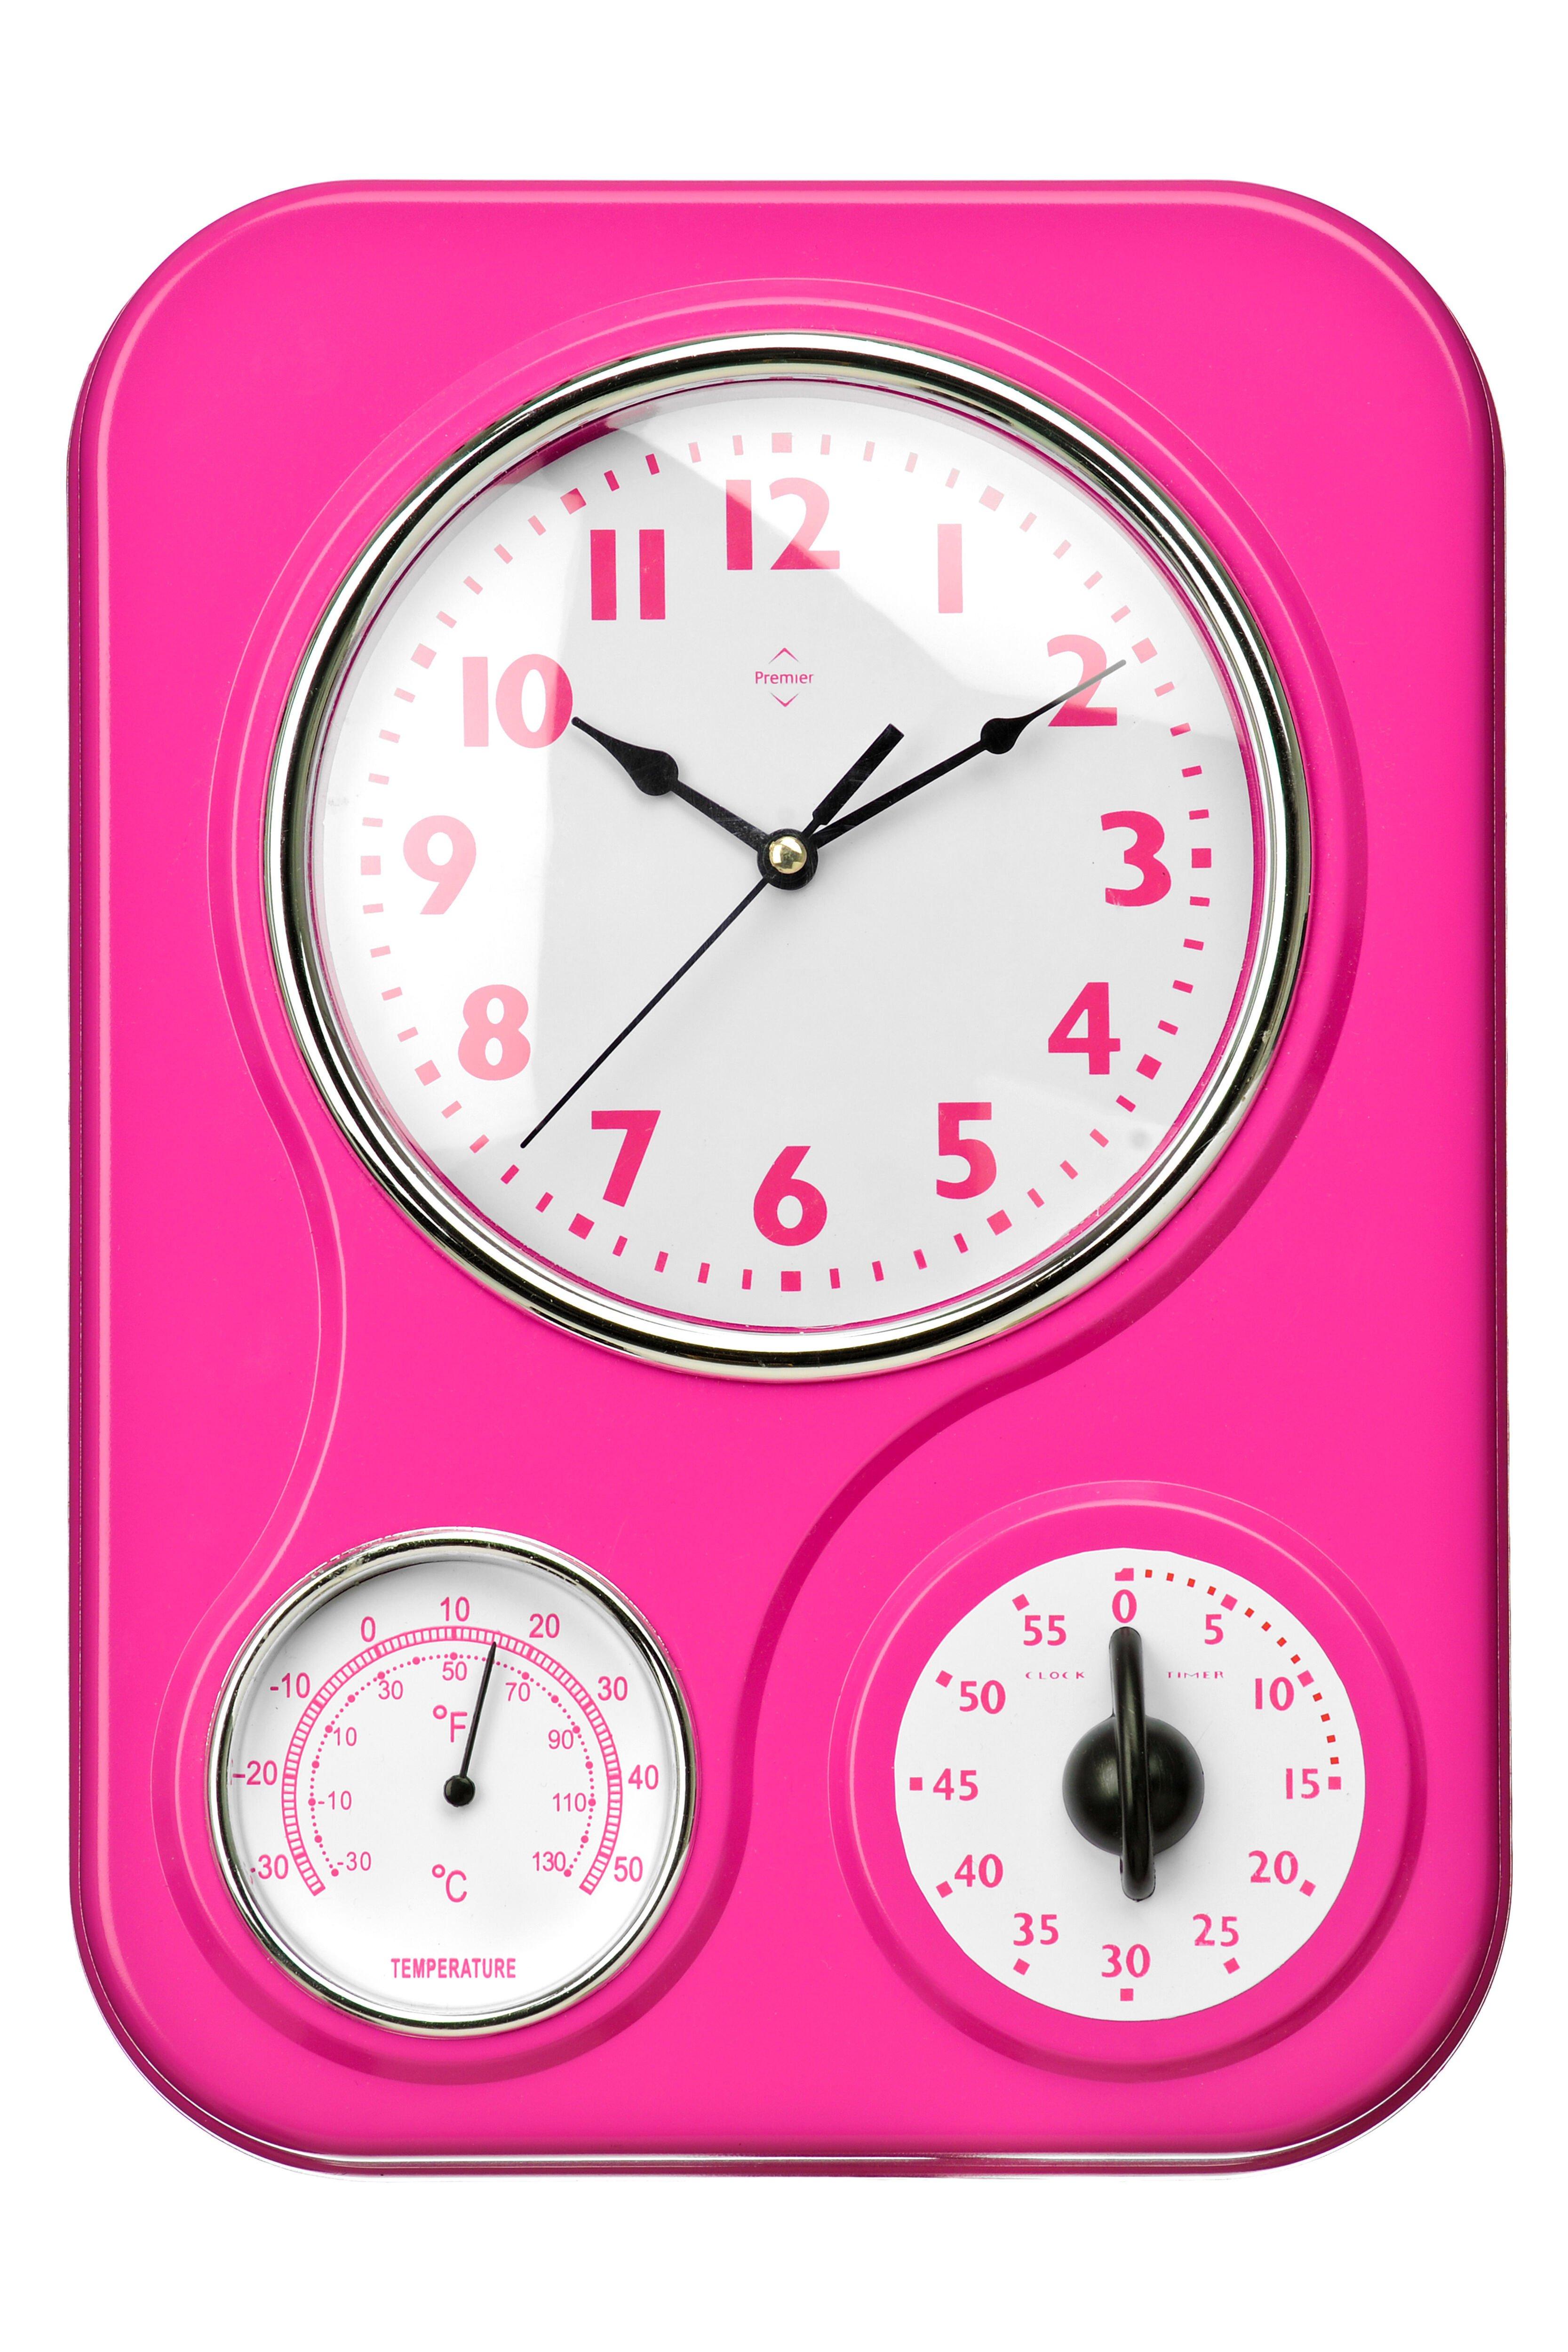 Photos - Wall Clock Premier Maison by  Hot Pink Timer/Temperature Display  